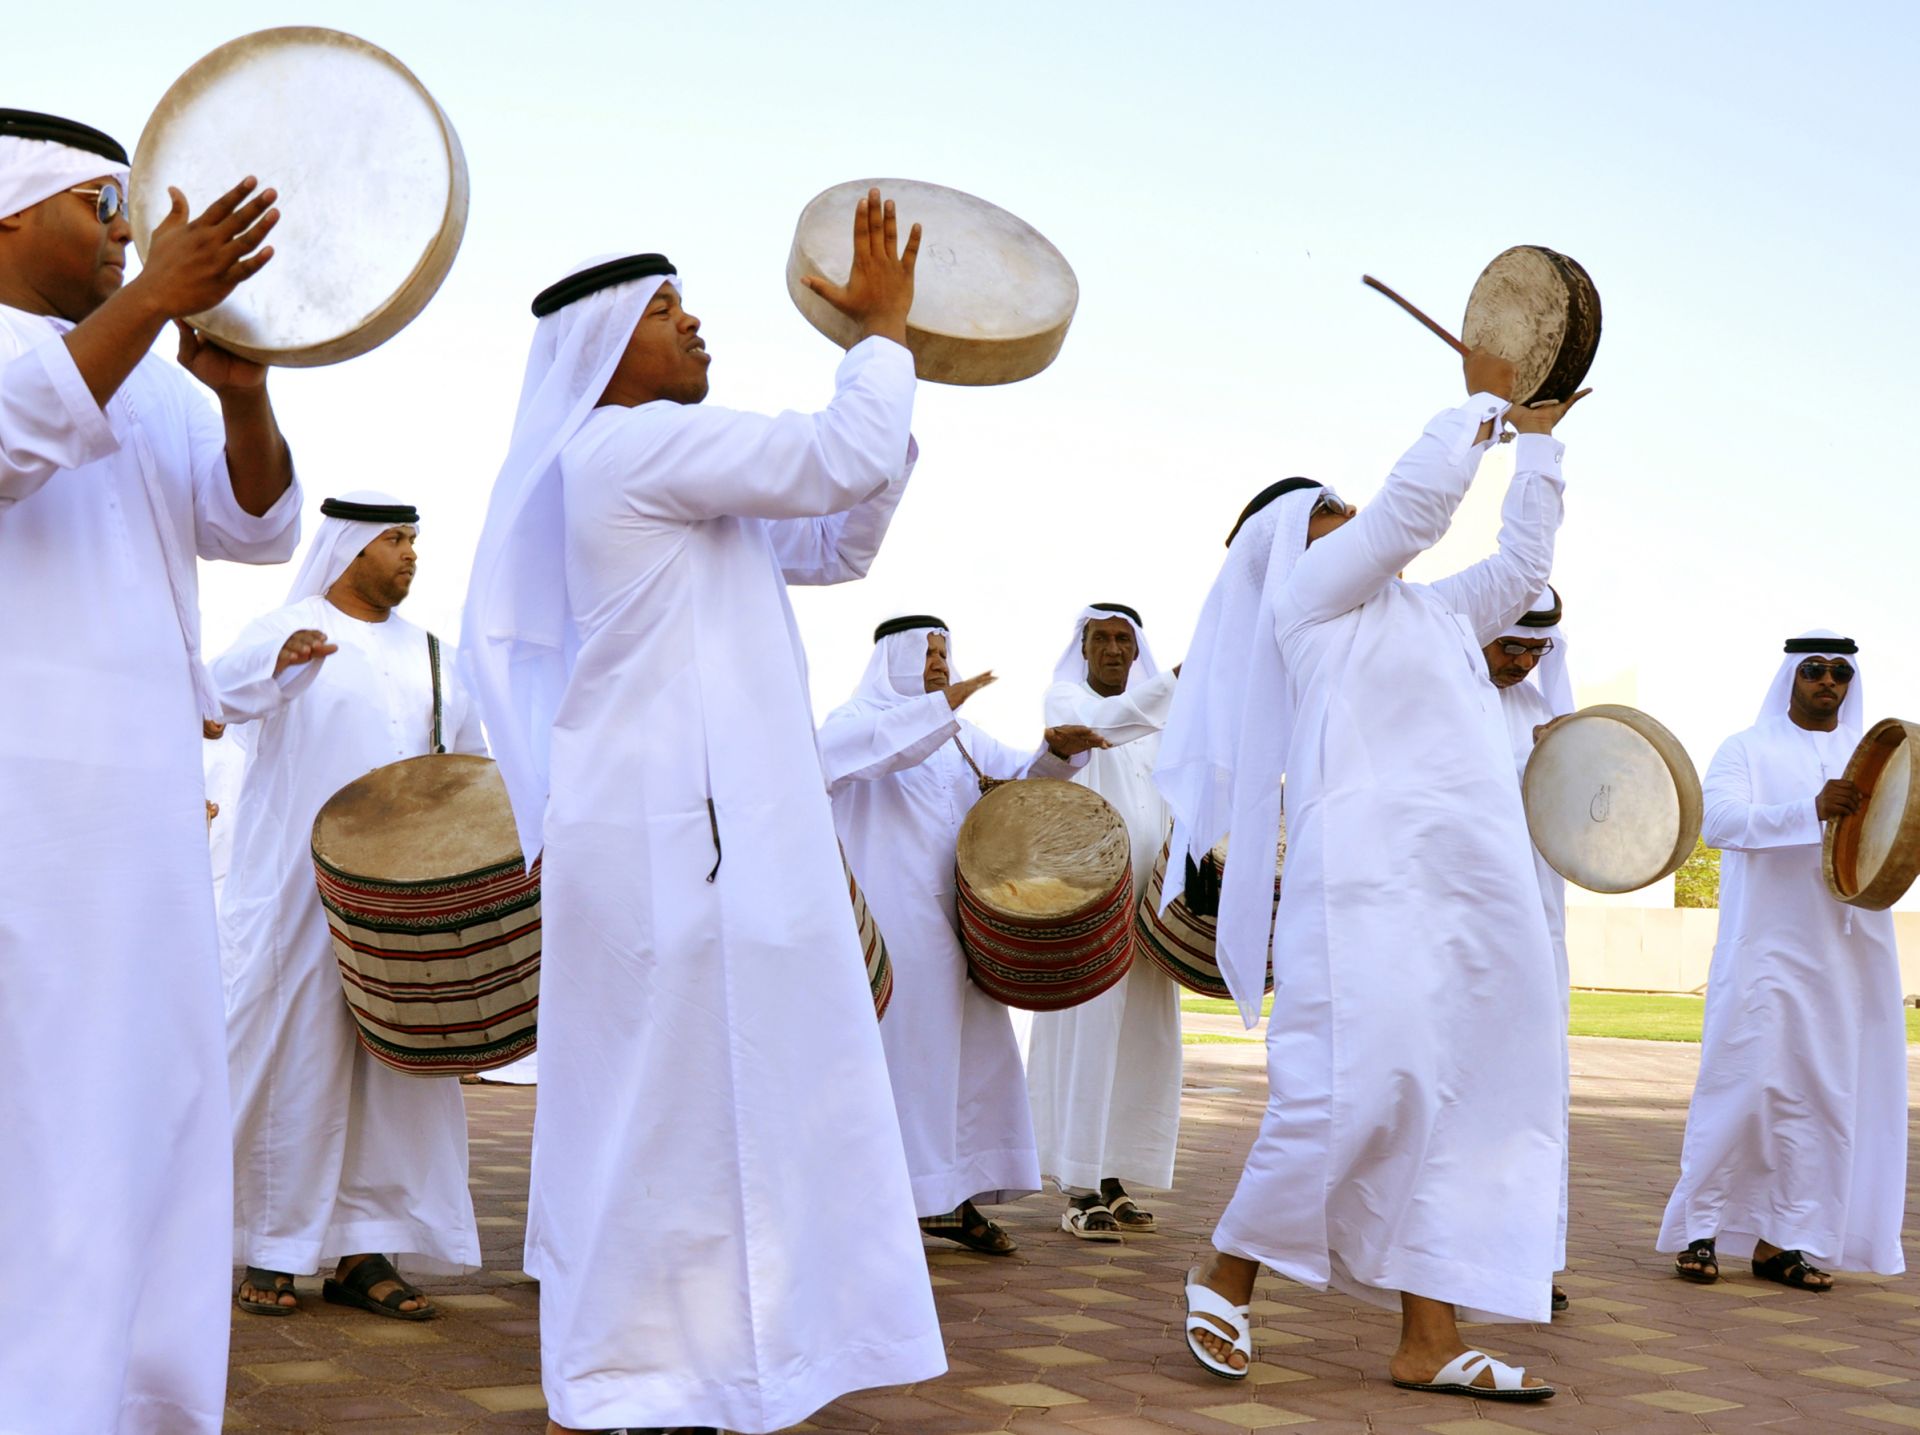 Musical instruments (drums and tambourines) used for an AI-Ayyala performance in the UAE.